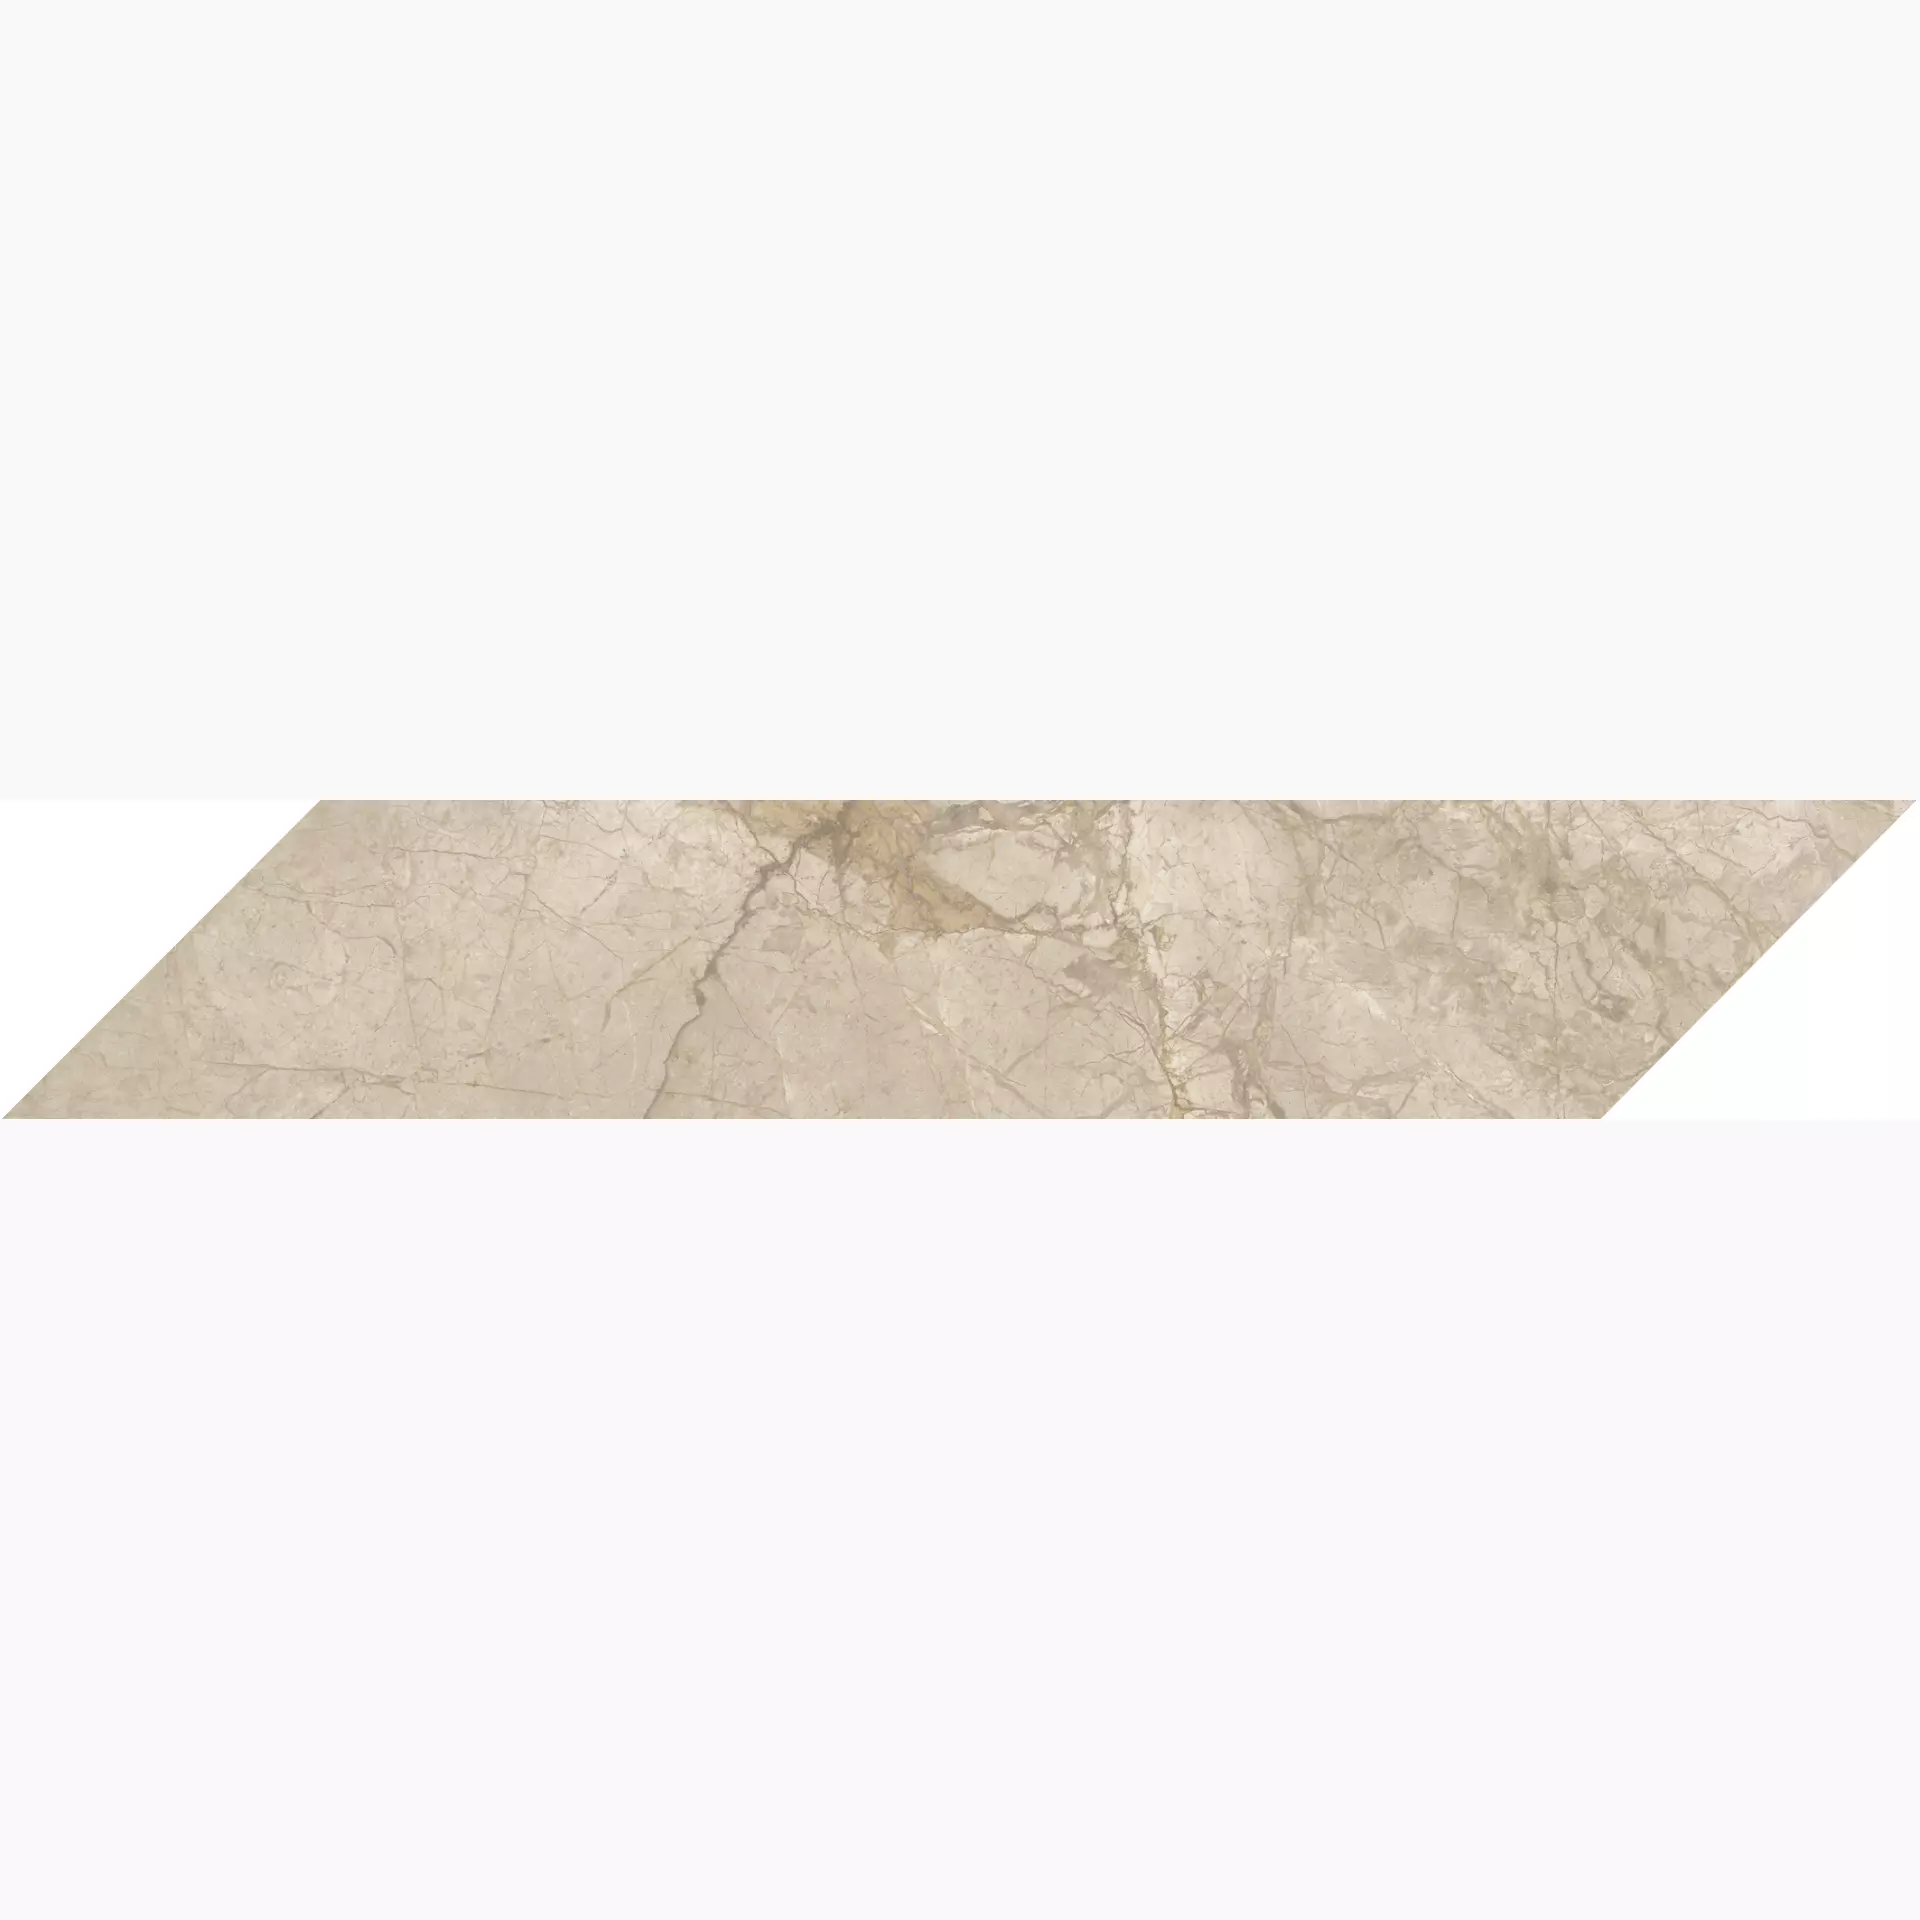 Keope Elements Lux Crema Beige Lappato Chevron Right 41325433 10x60cm rectified 9mm